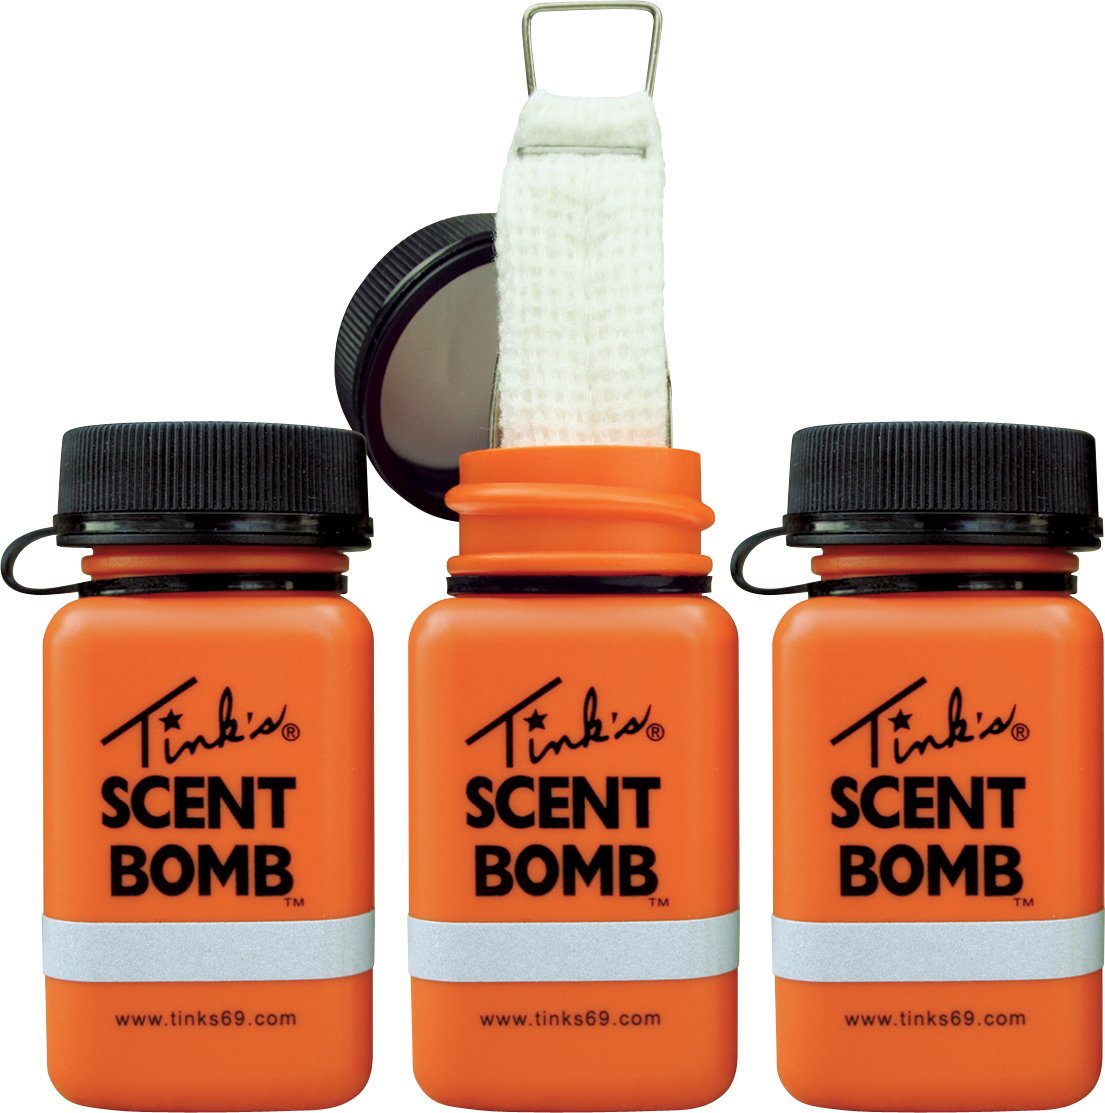 3-Pack TINK'S Scent Bombs 1 oz. $1.43 + Free Shipping w/ Prime or on $35+